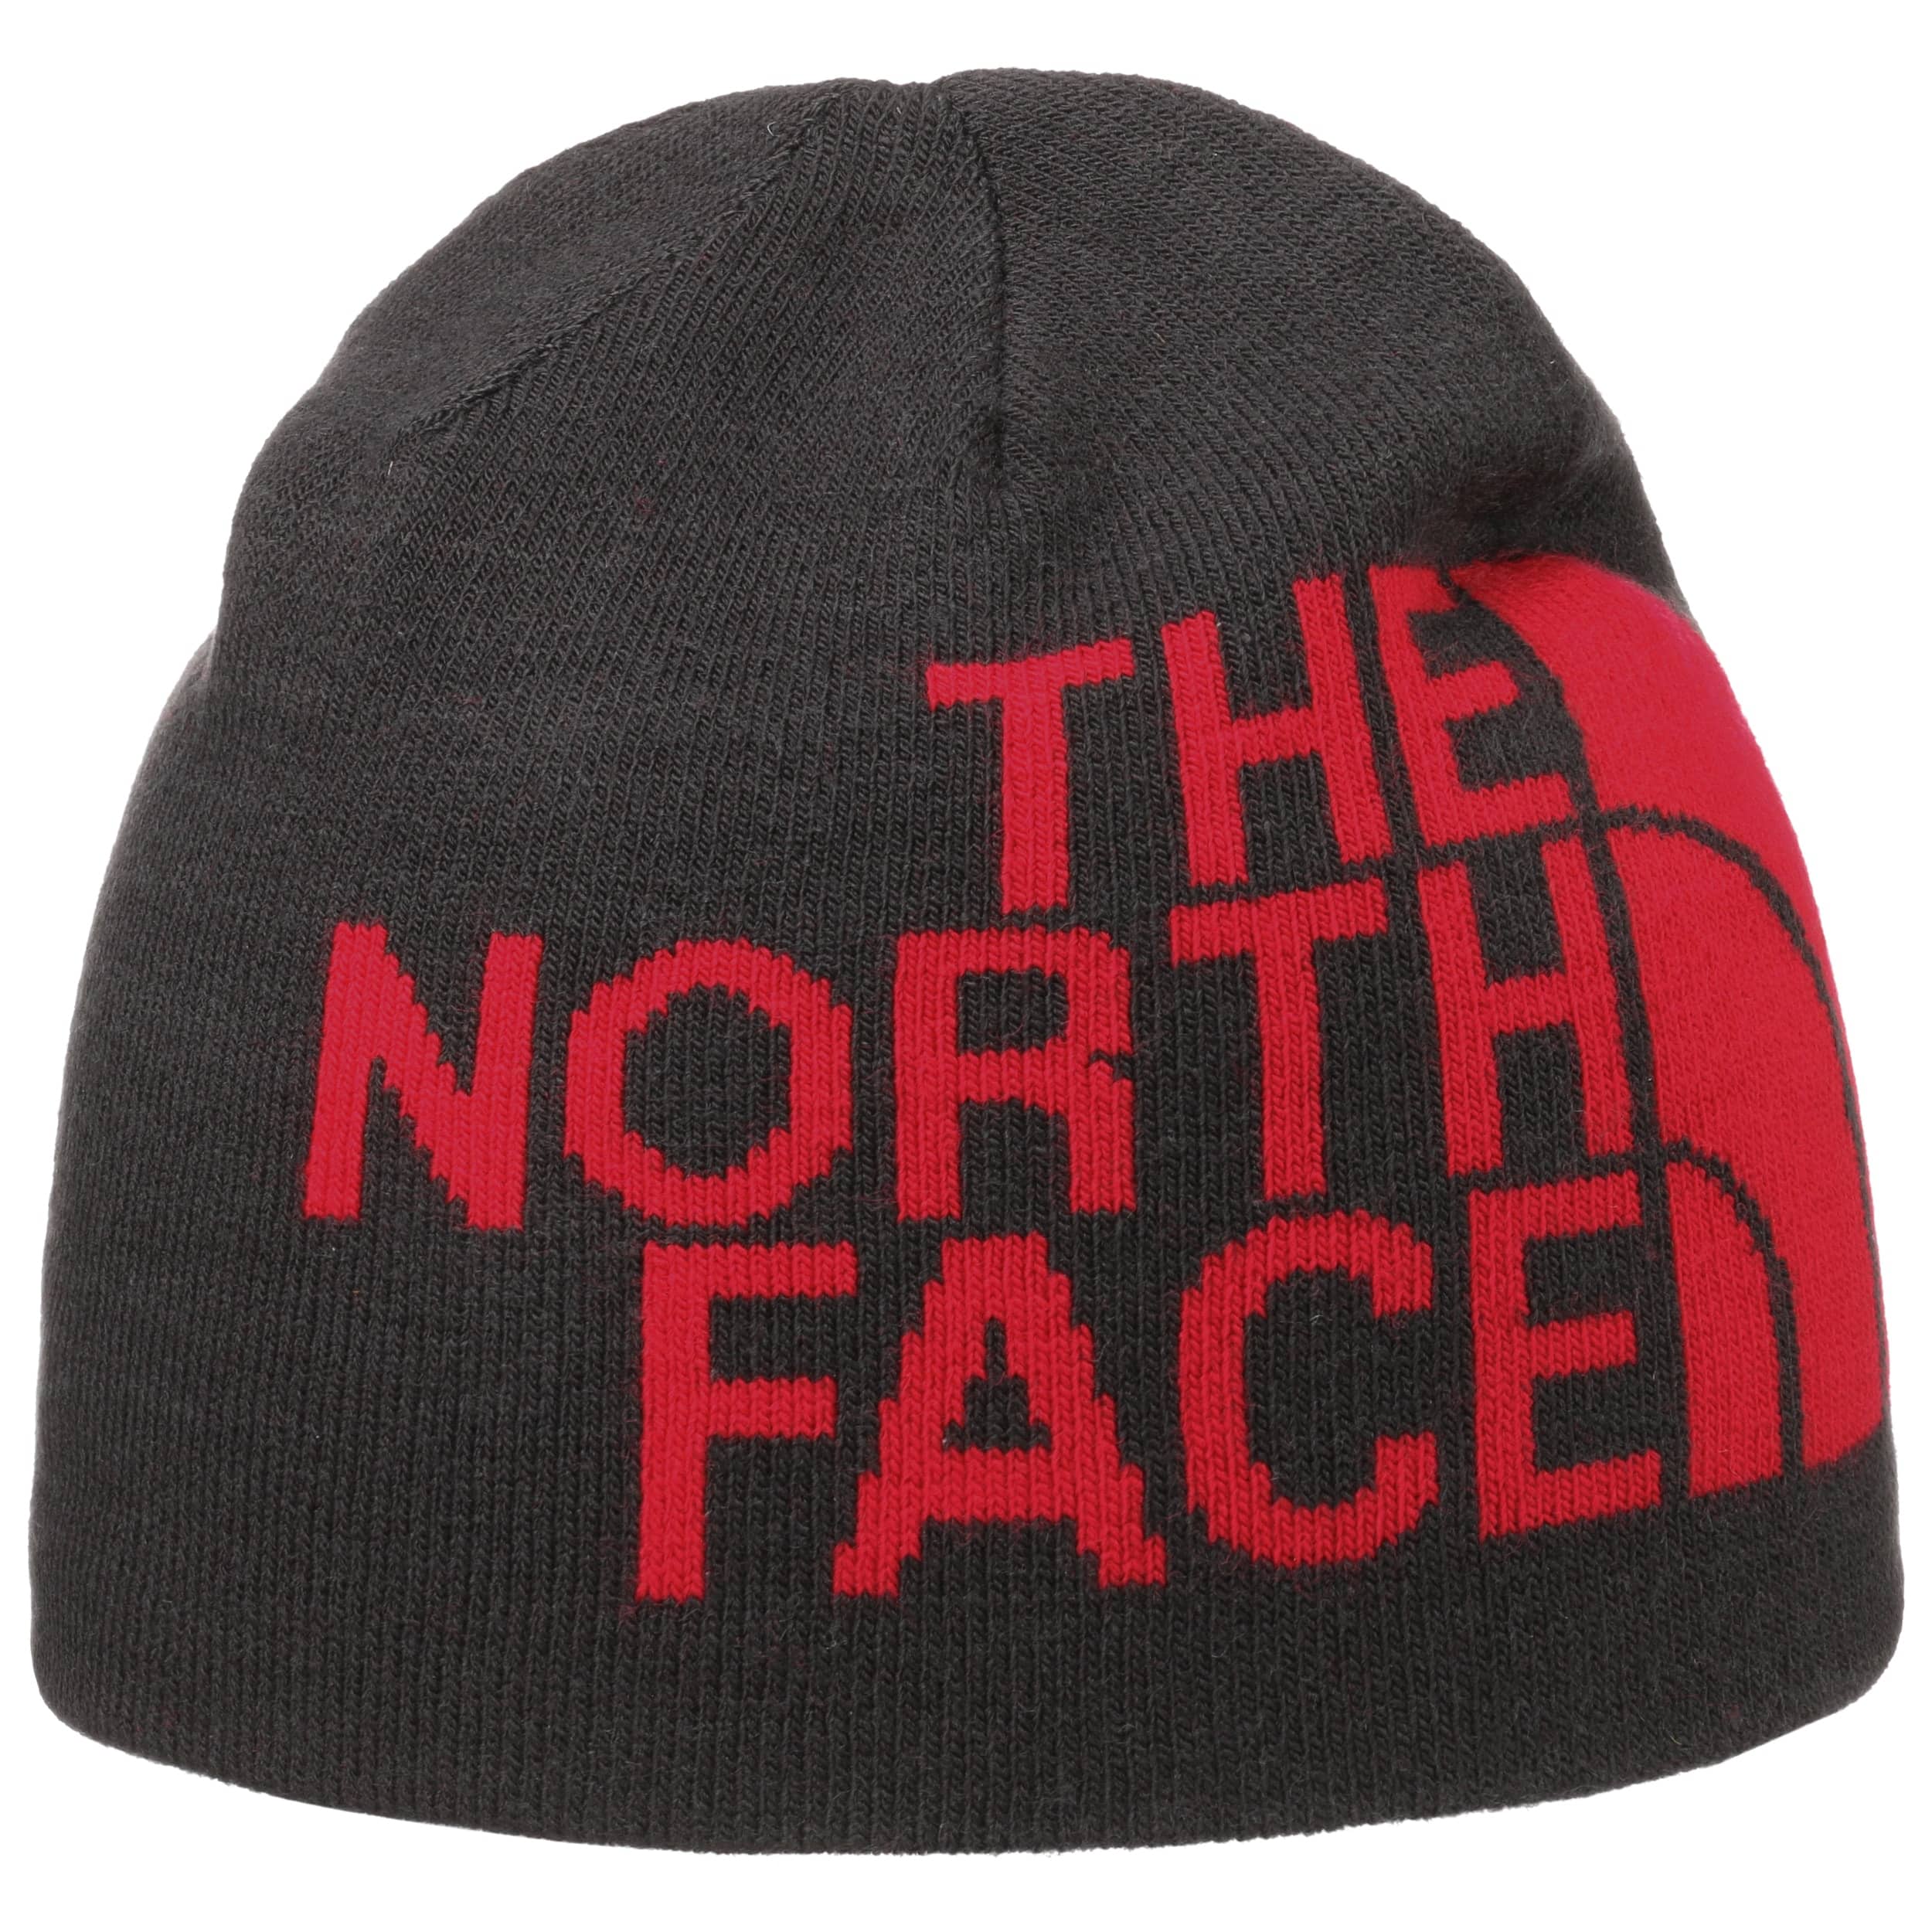 Rev Logo Beanie Hat by The North Face - 40,95 €